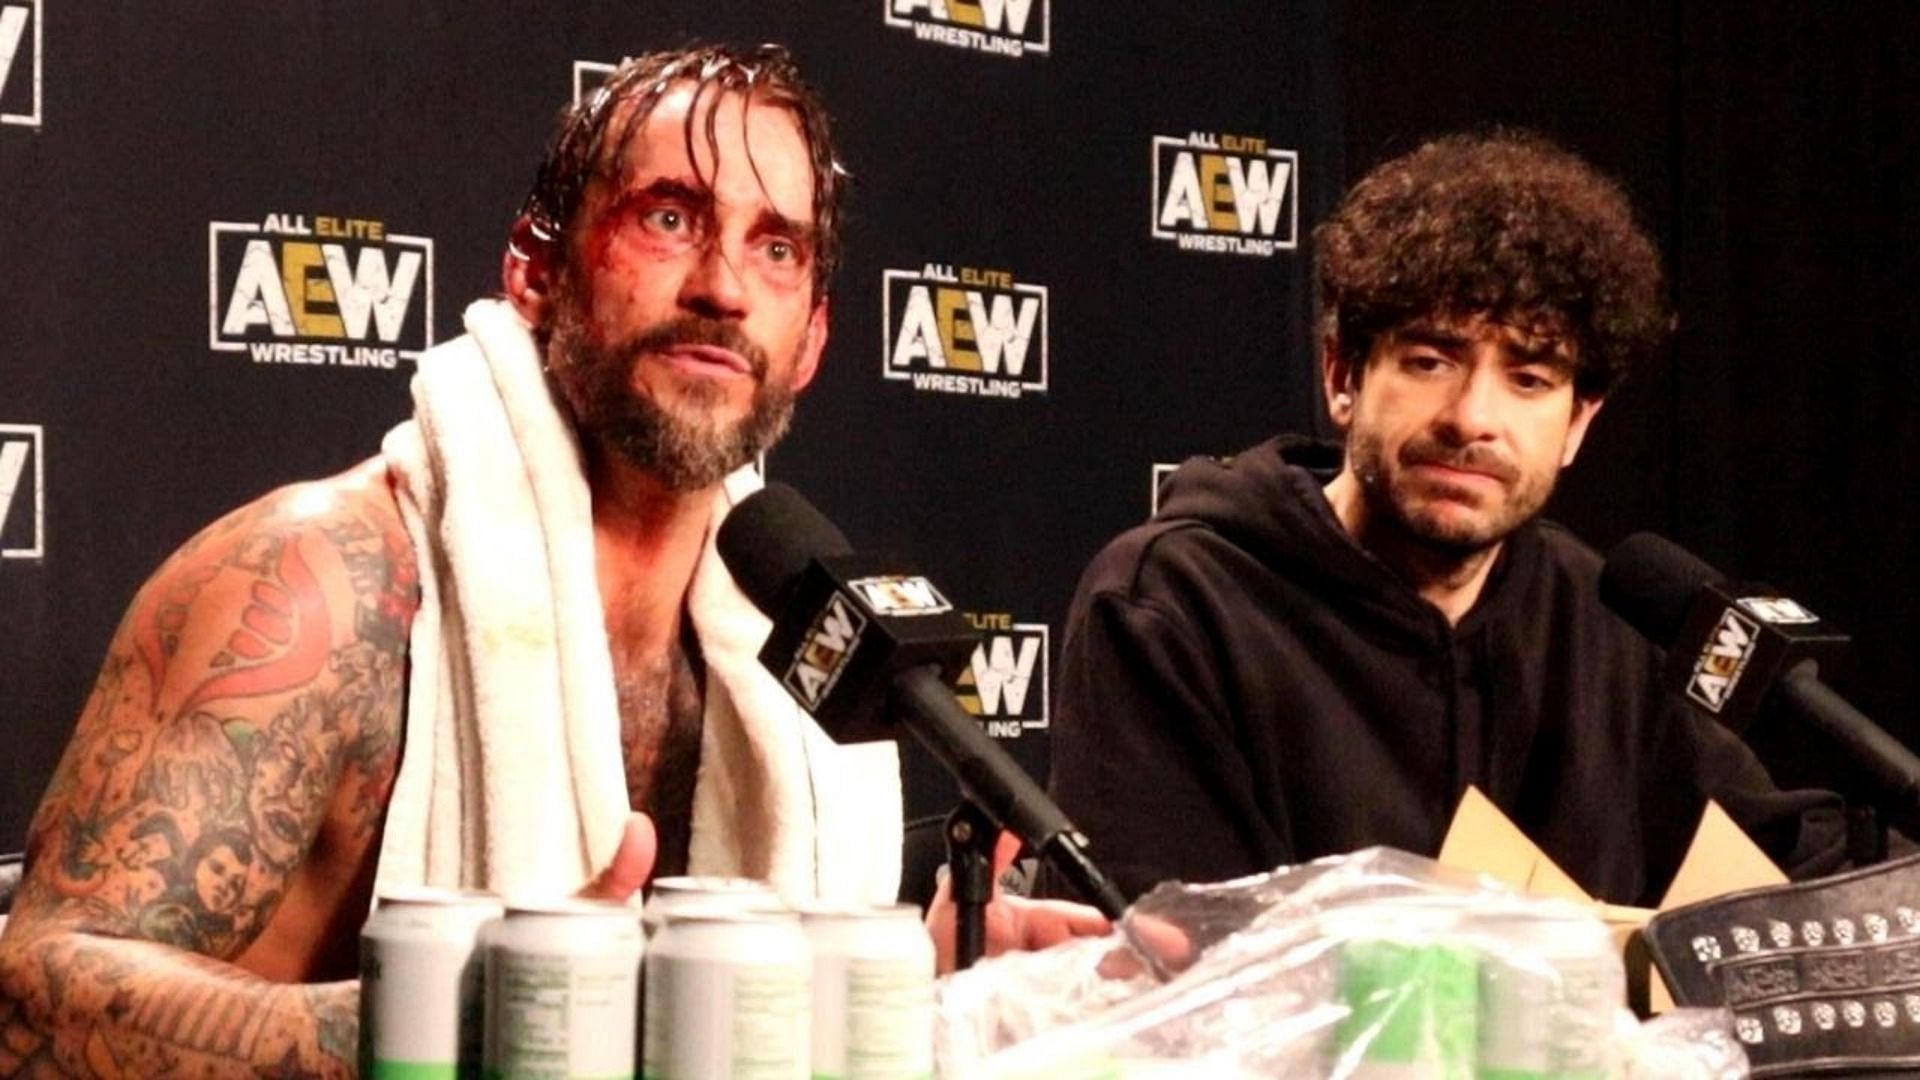 CM Punk blasted The Elite, Colt Cabana and Adam Page at post-All Out media scrum.